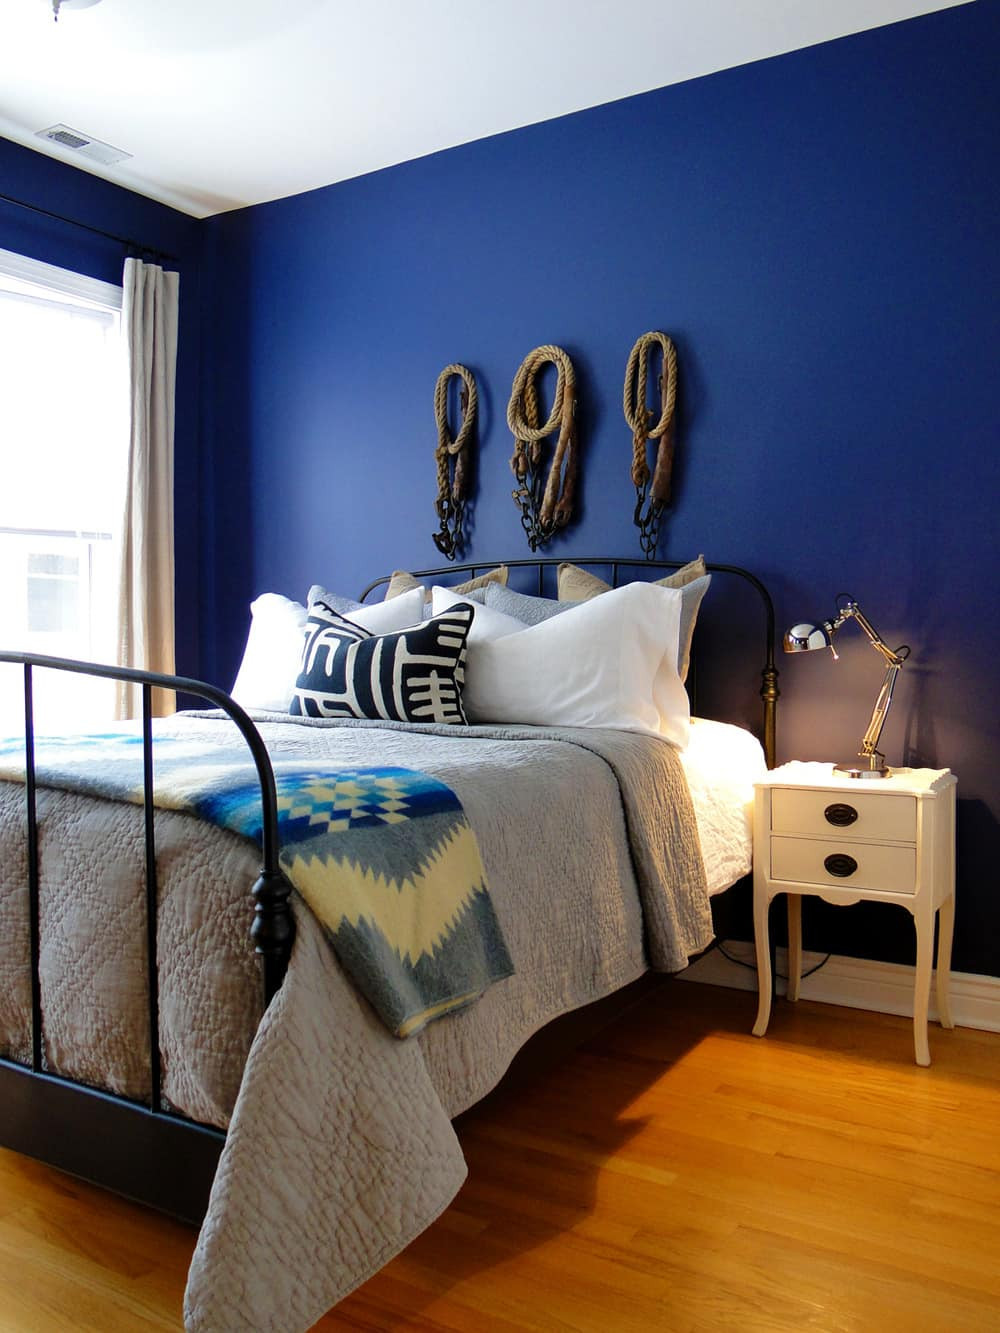 Blue Bedroom Paint Color
 20 Bold & Beautiful Blue Wall Paint Colors